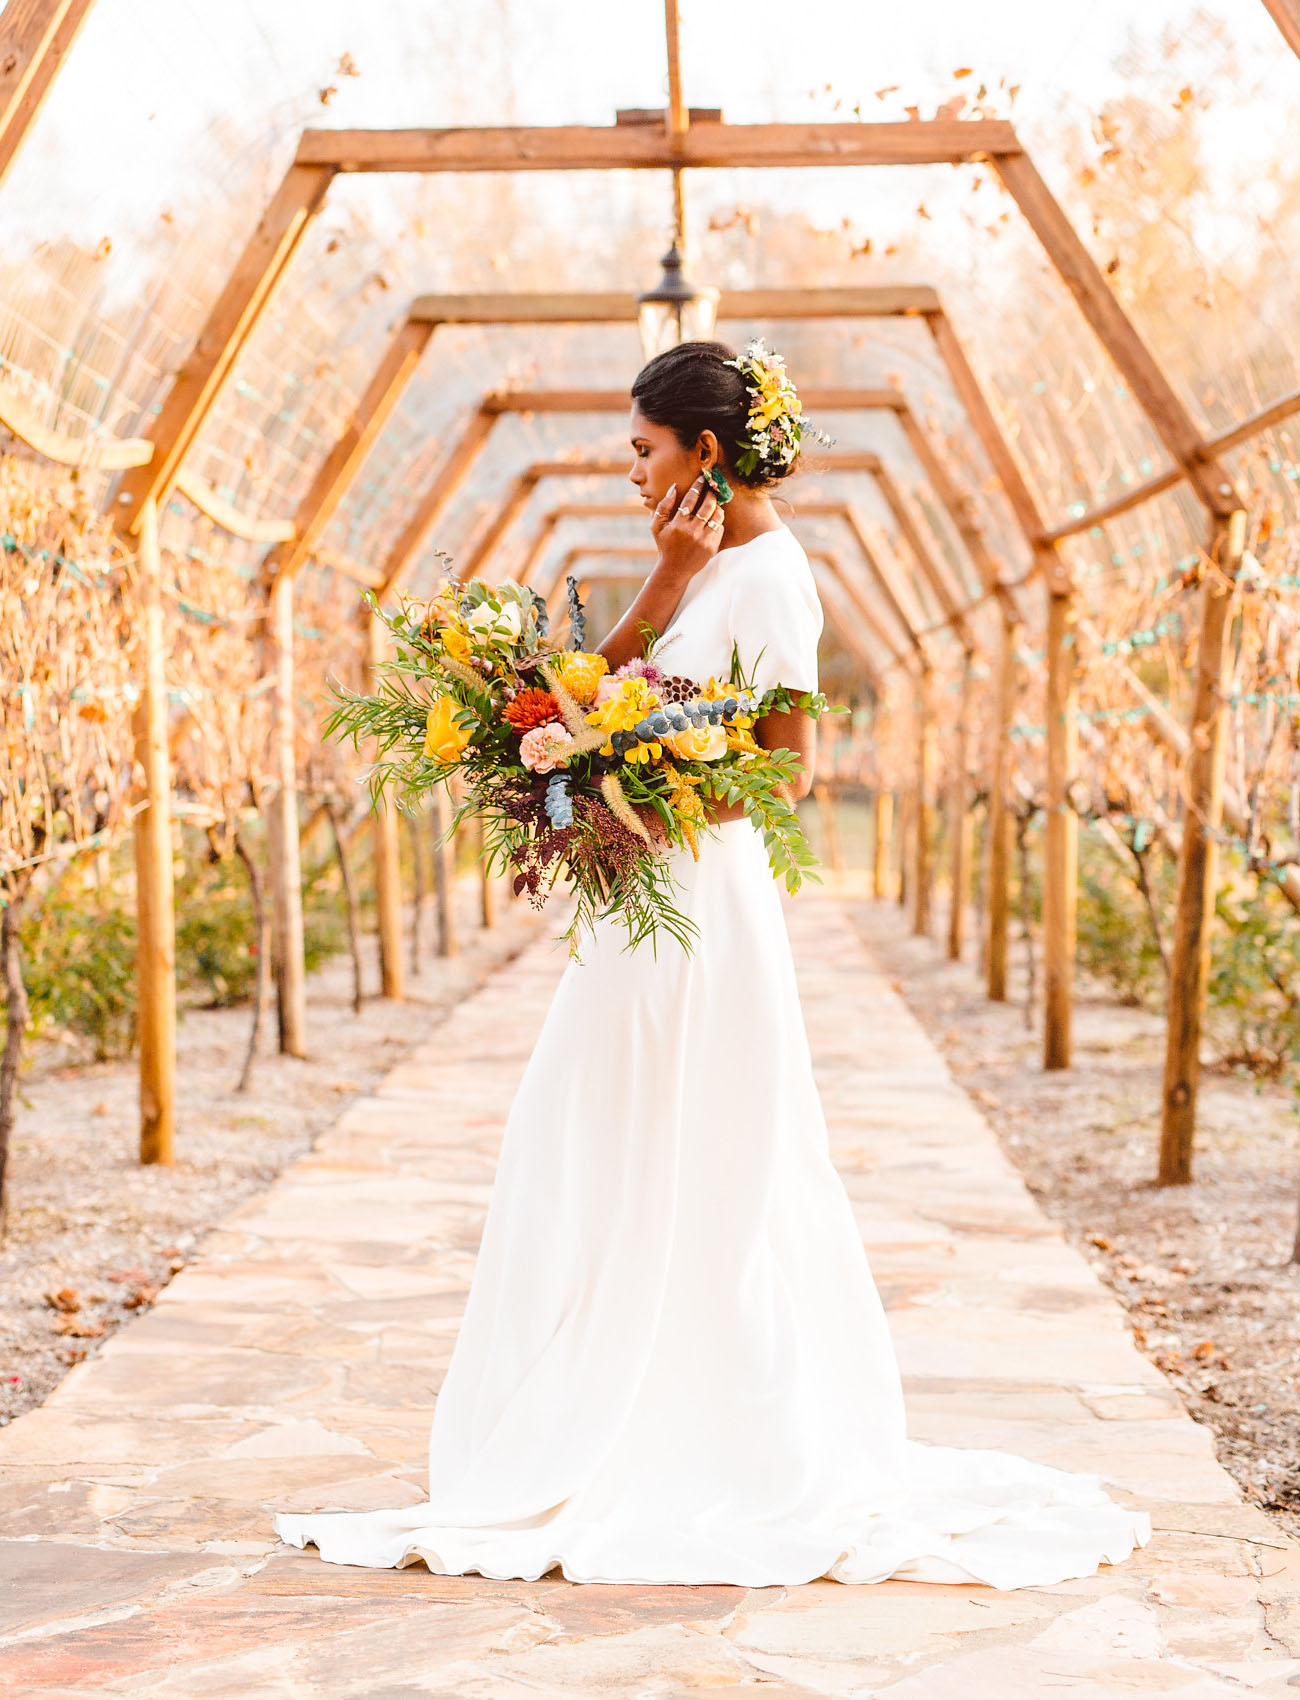 This bold and bright wedding shoot was done in the colors that aren't typical for winter   mustard, emerald, light green